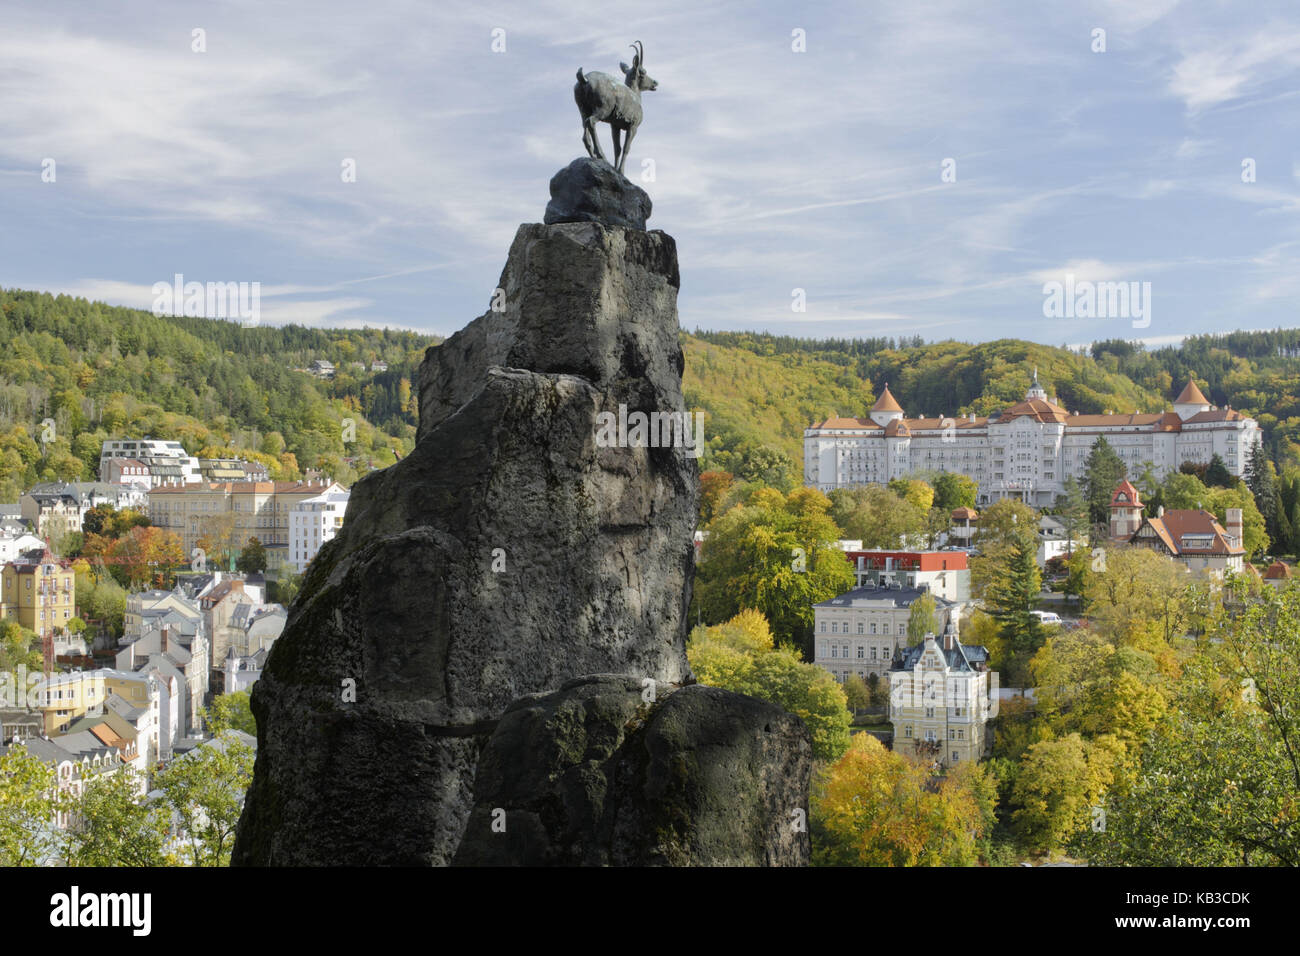 Statue, Gämse on rock over Karlsbad, original of the statue developed in 1851 from Berlin sculptor August Kiss, Czech Republic, Europe, Stock Photo